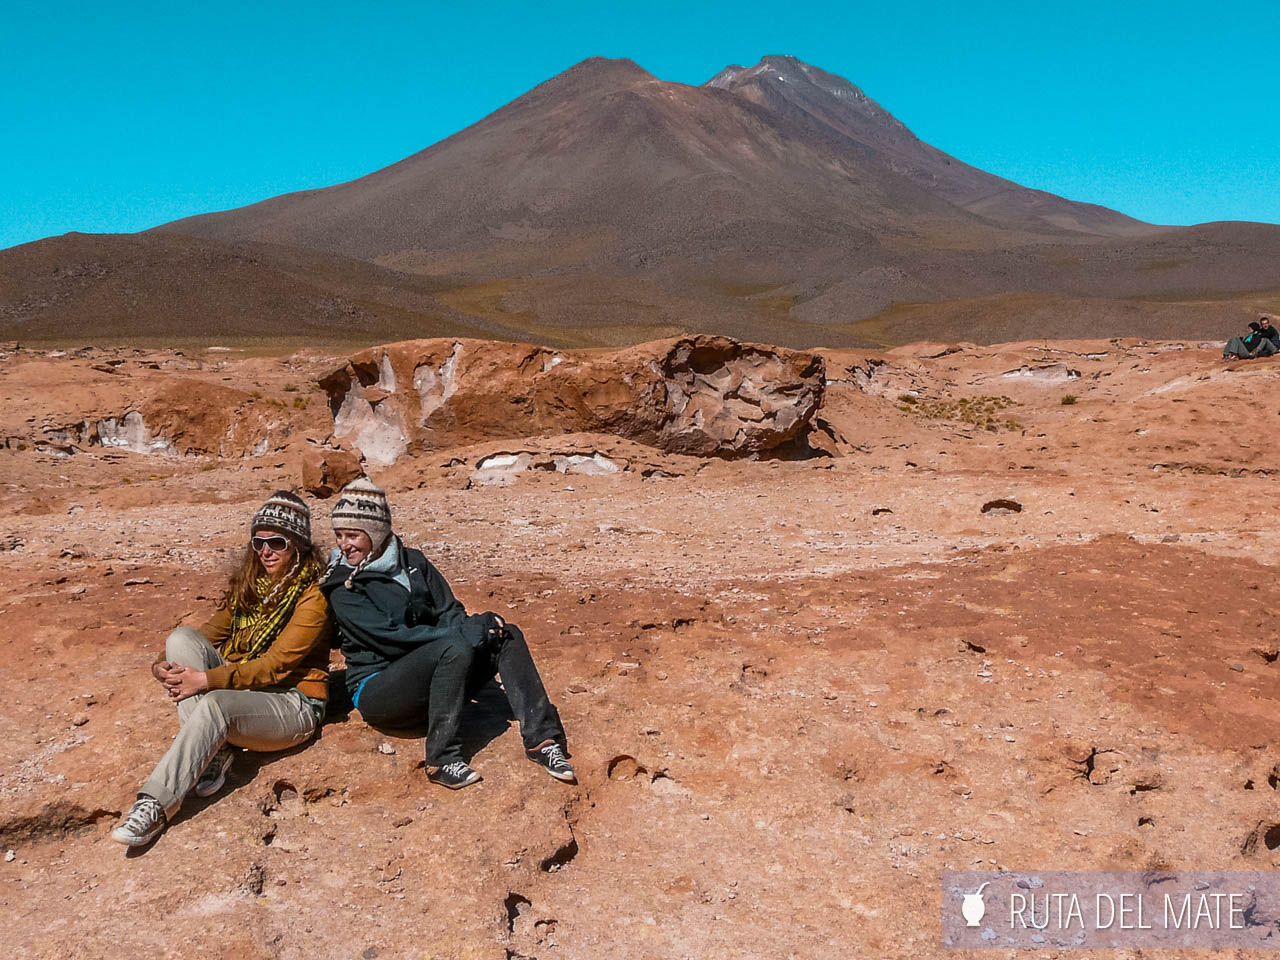 Complete guide to visit the Uyuni salt flats, the best tips.